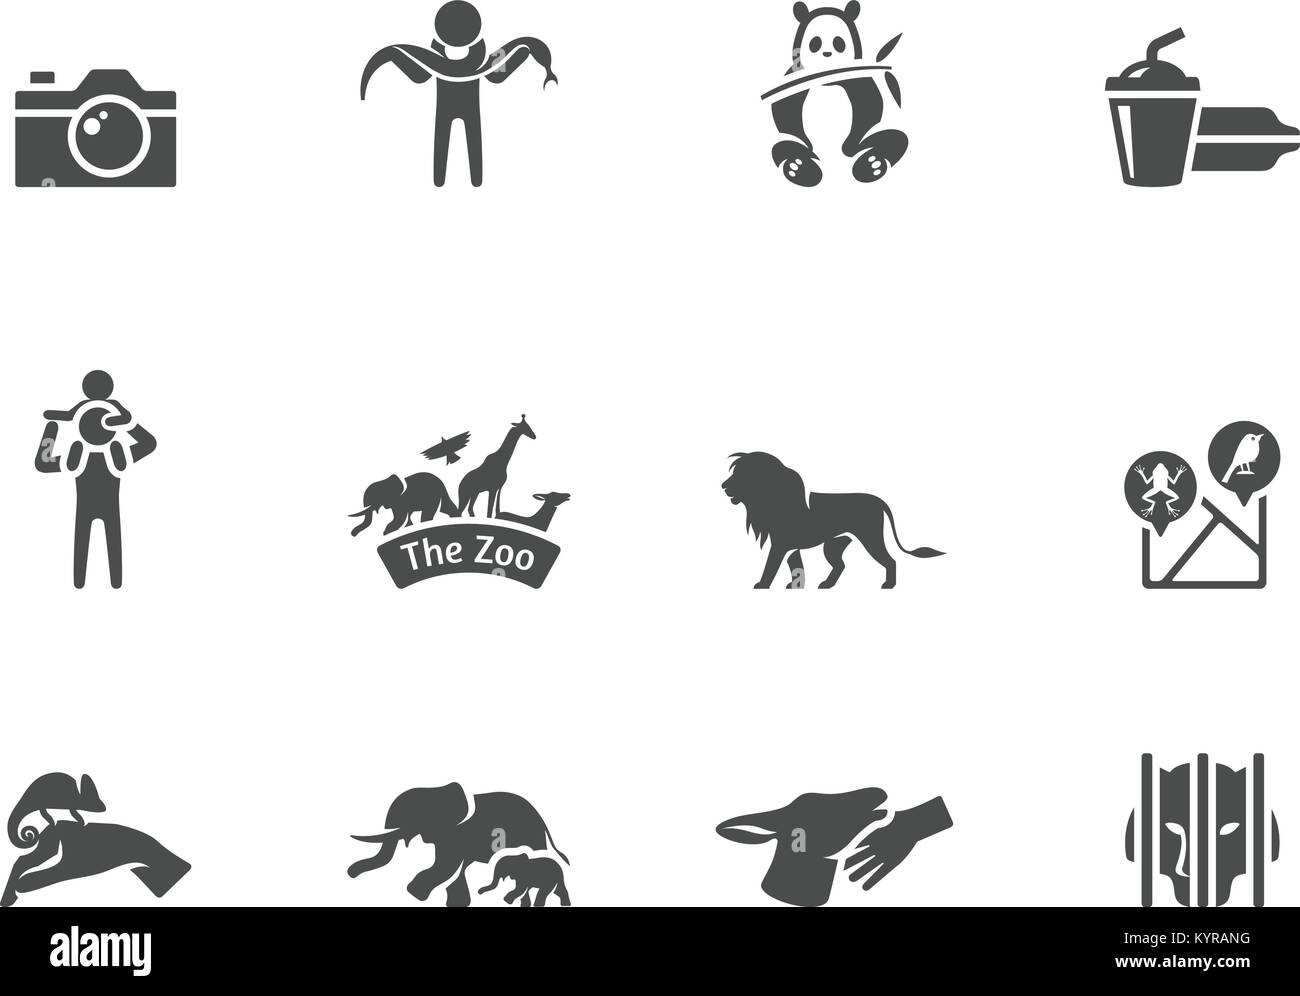 Zoo icons in black and white. Vector illustration. Stock Vector